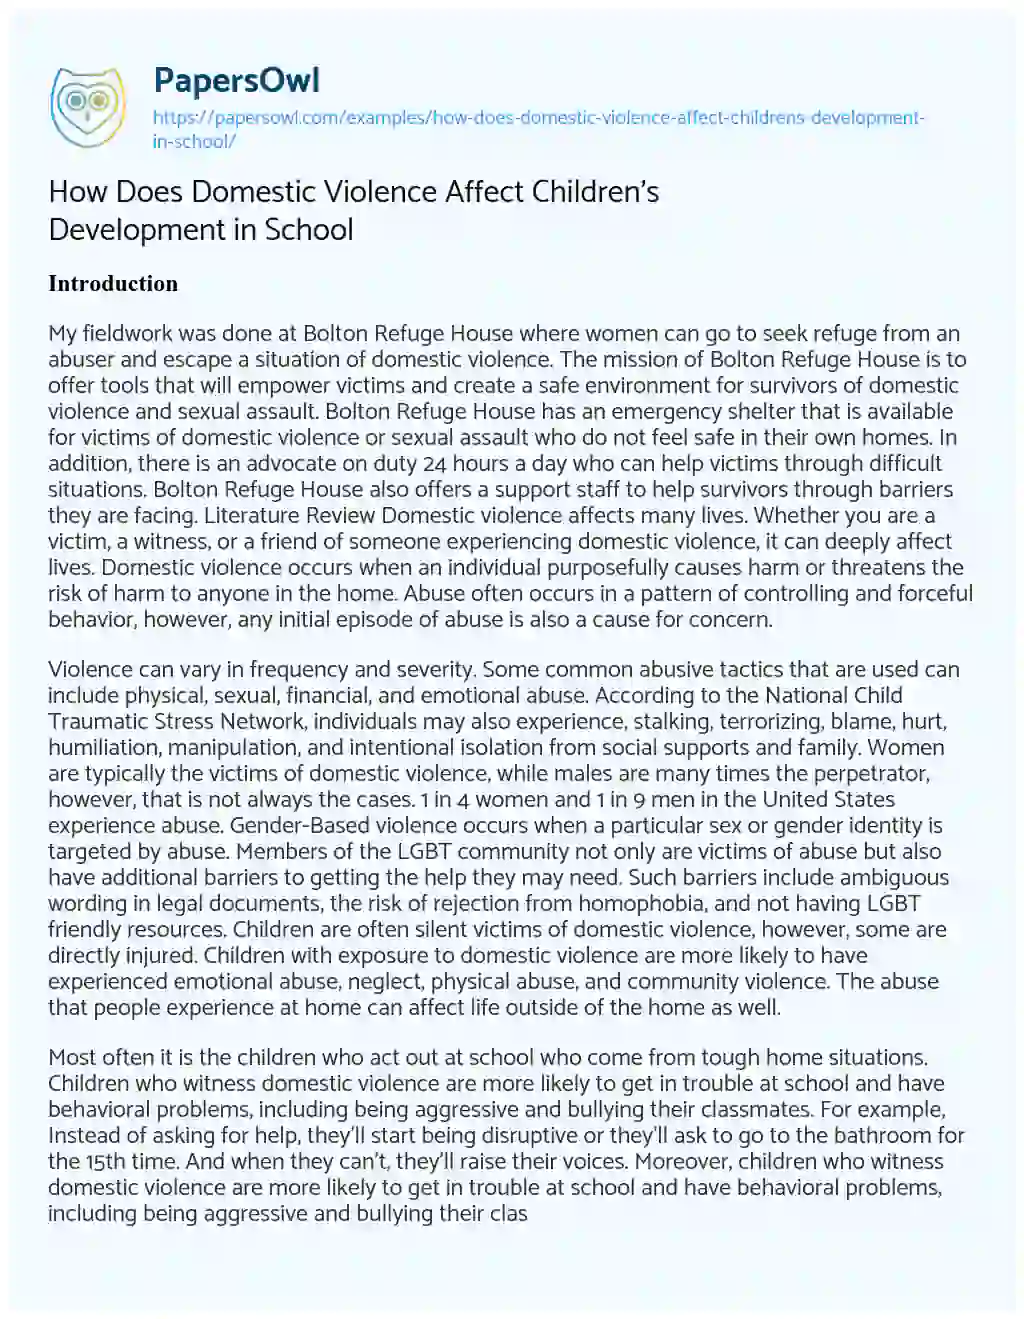 Essay on How does Domestic Violence Affect Children’s Development in School